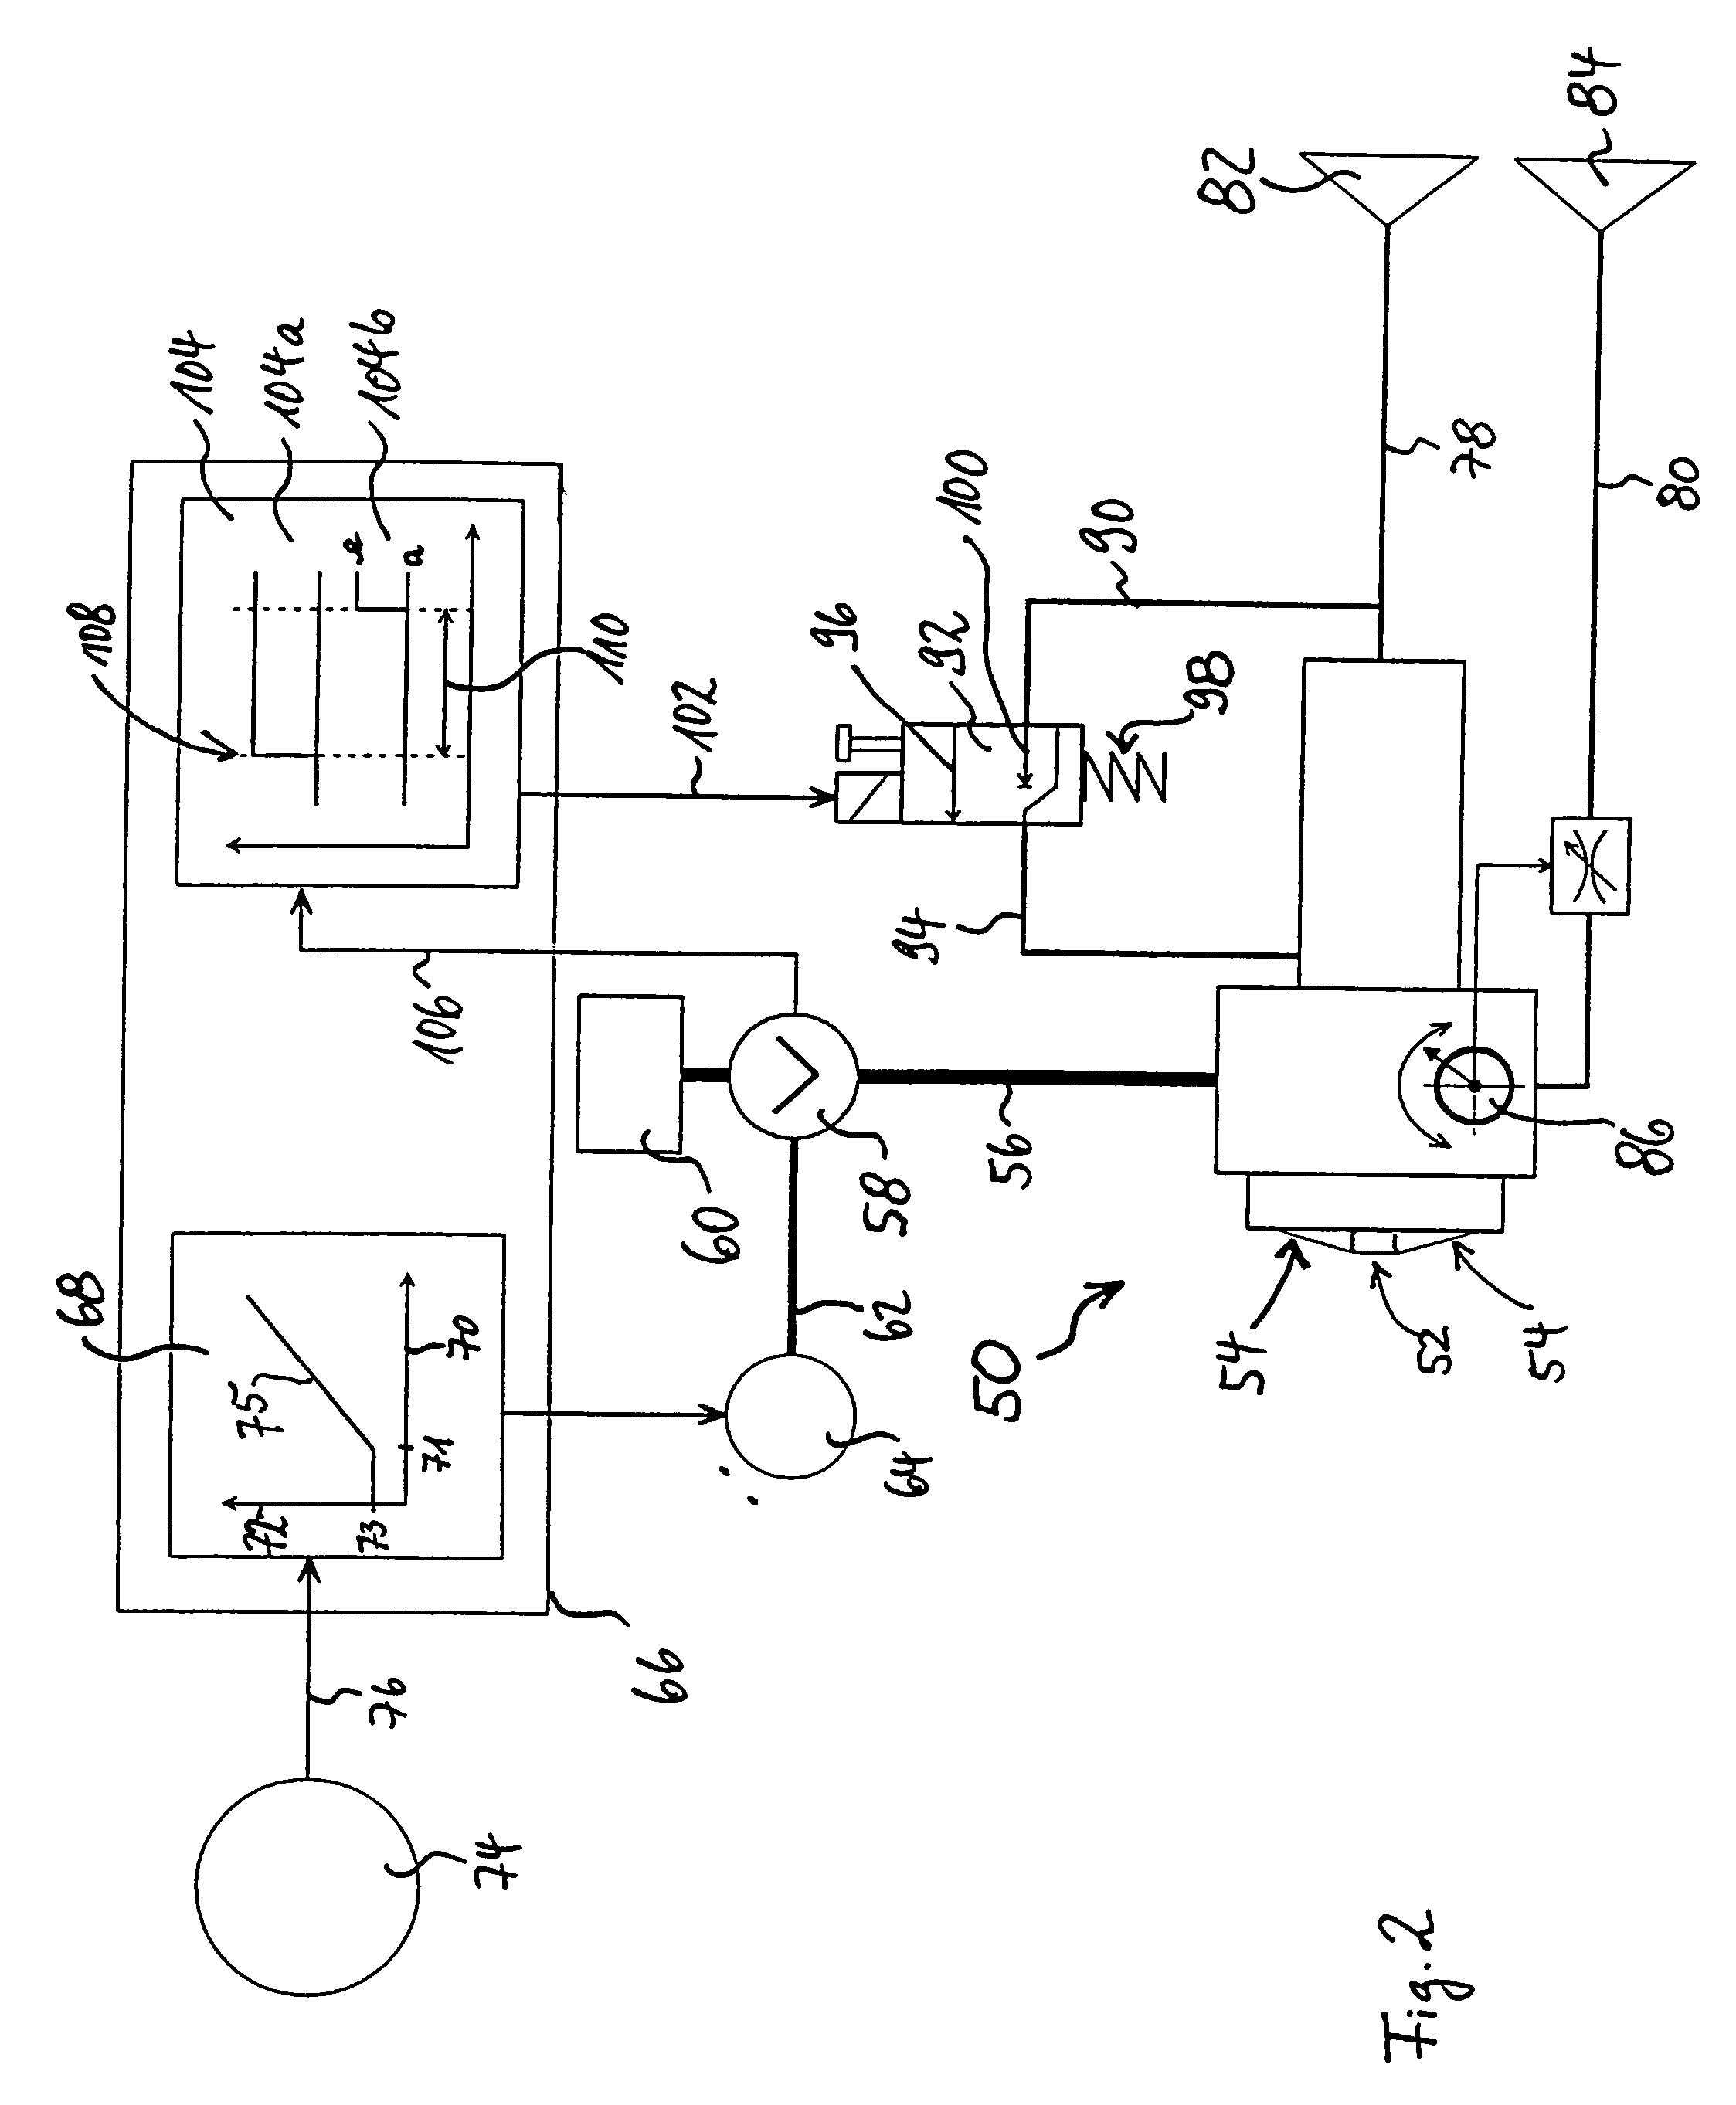 Method of and apparatus for applying adhesive to running webs of paper and the like